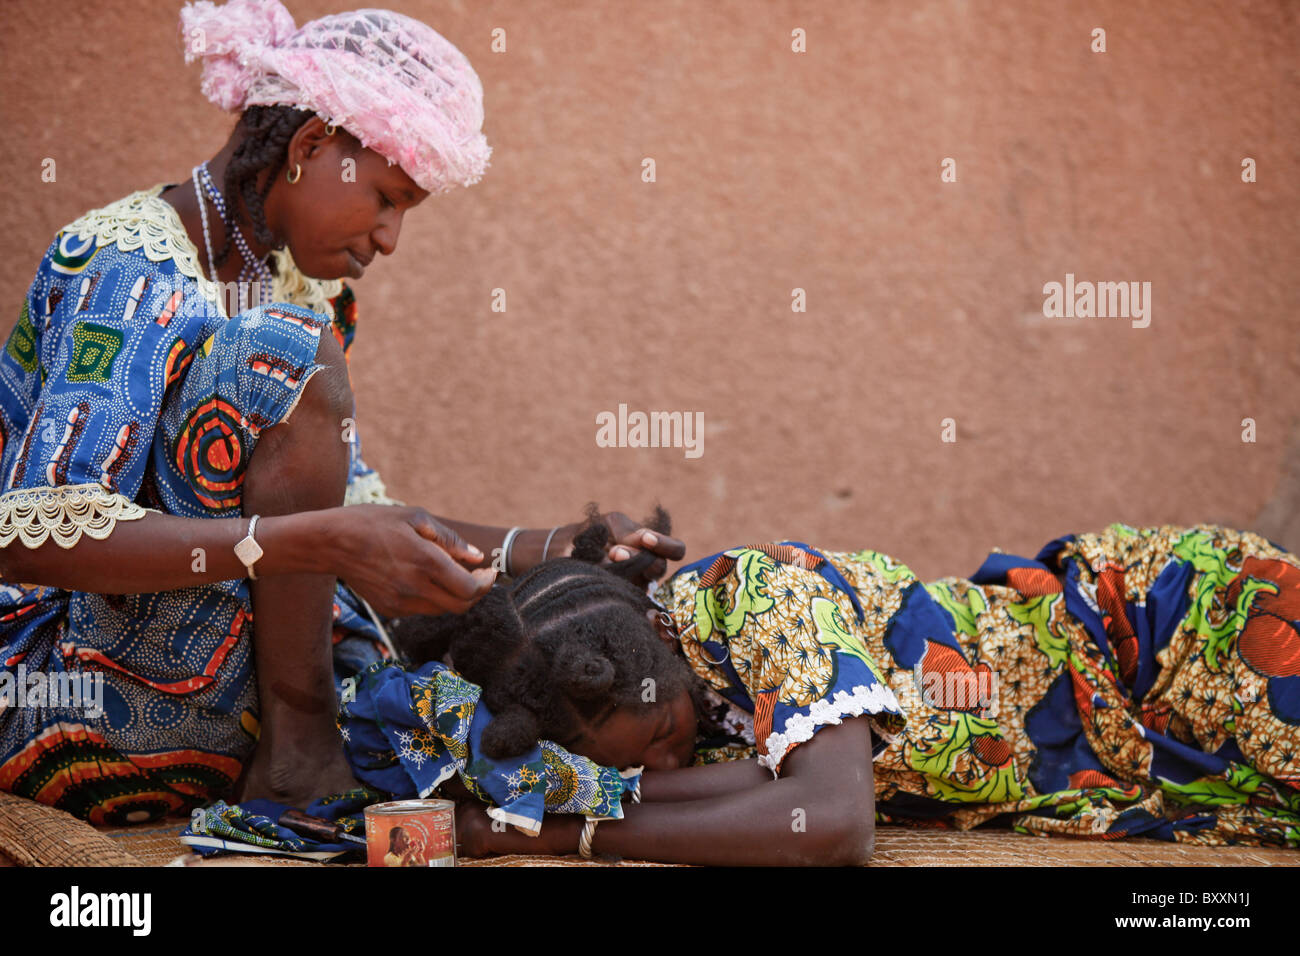 In the town of Djibo in northern Burkina Faso, a young woman braids her cousin's hair in traditional Fulani style. Stock Photo